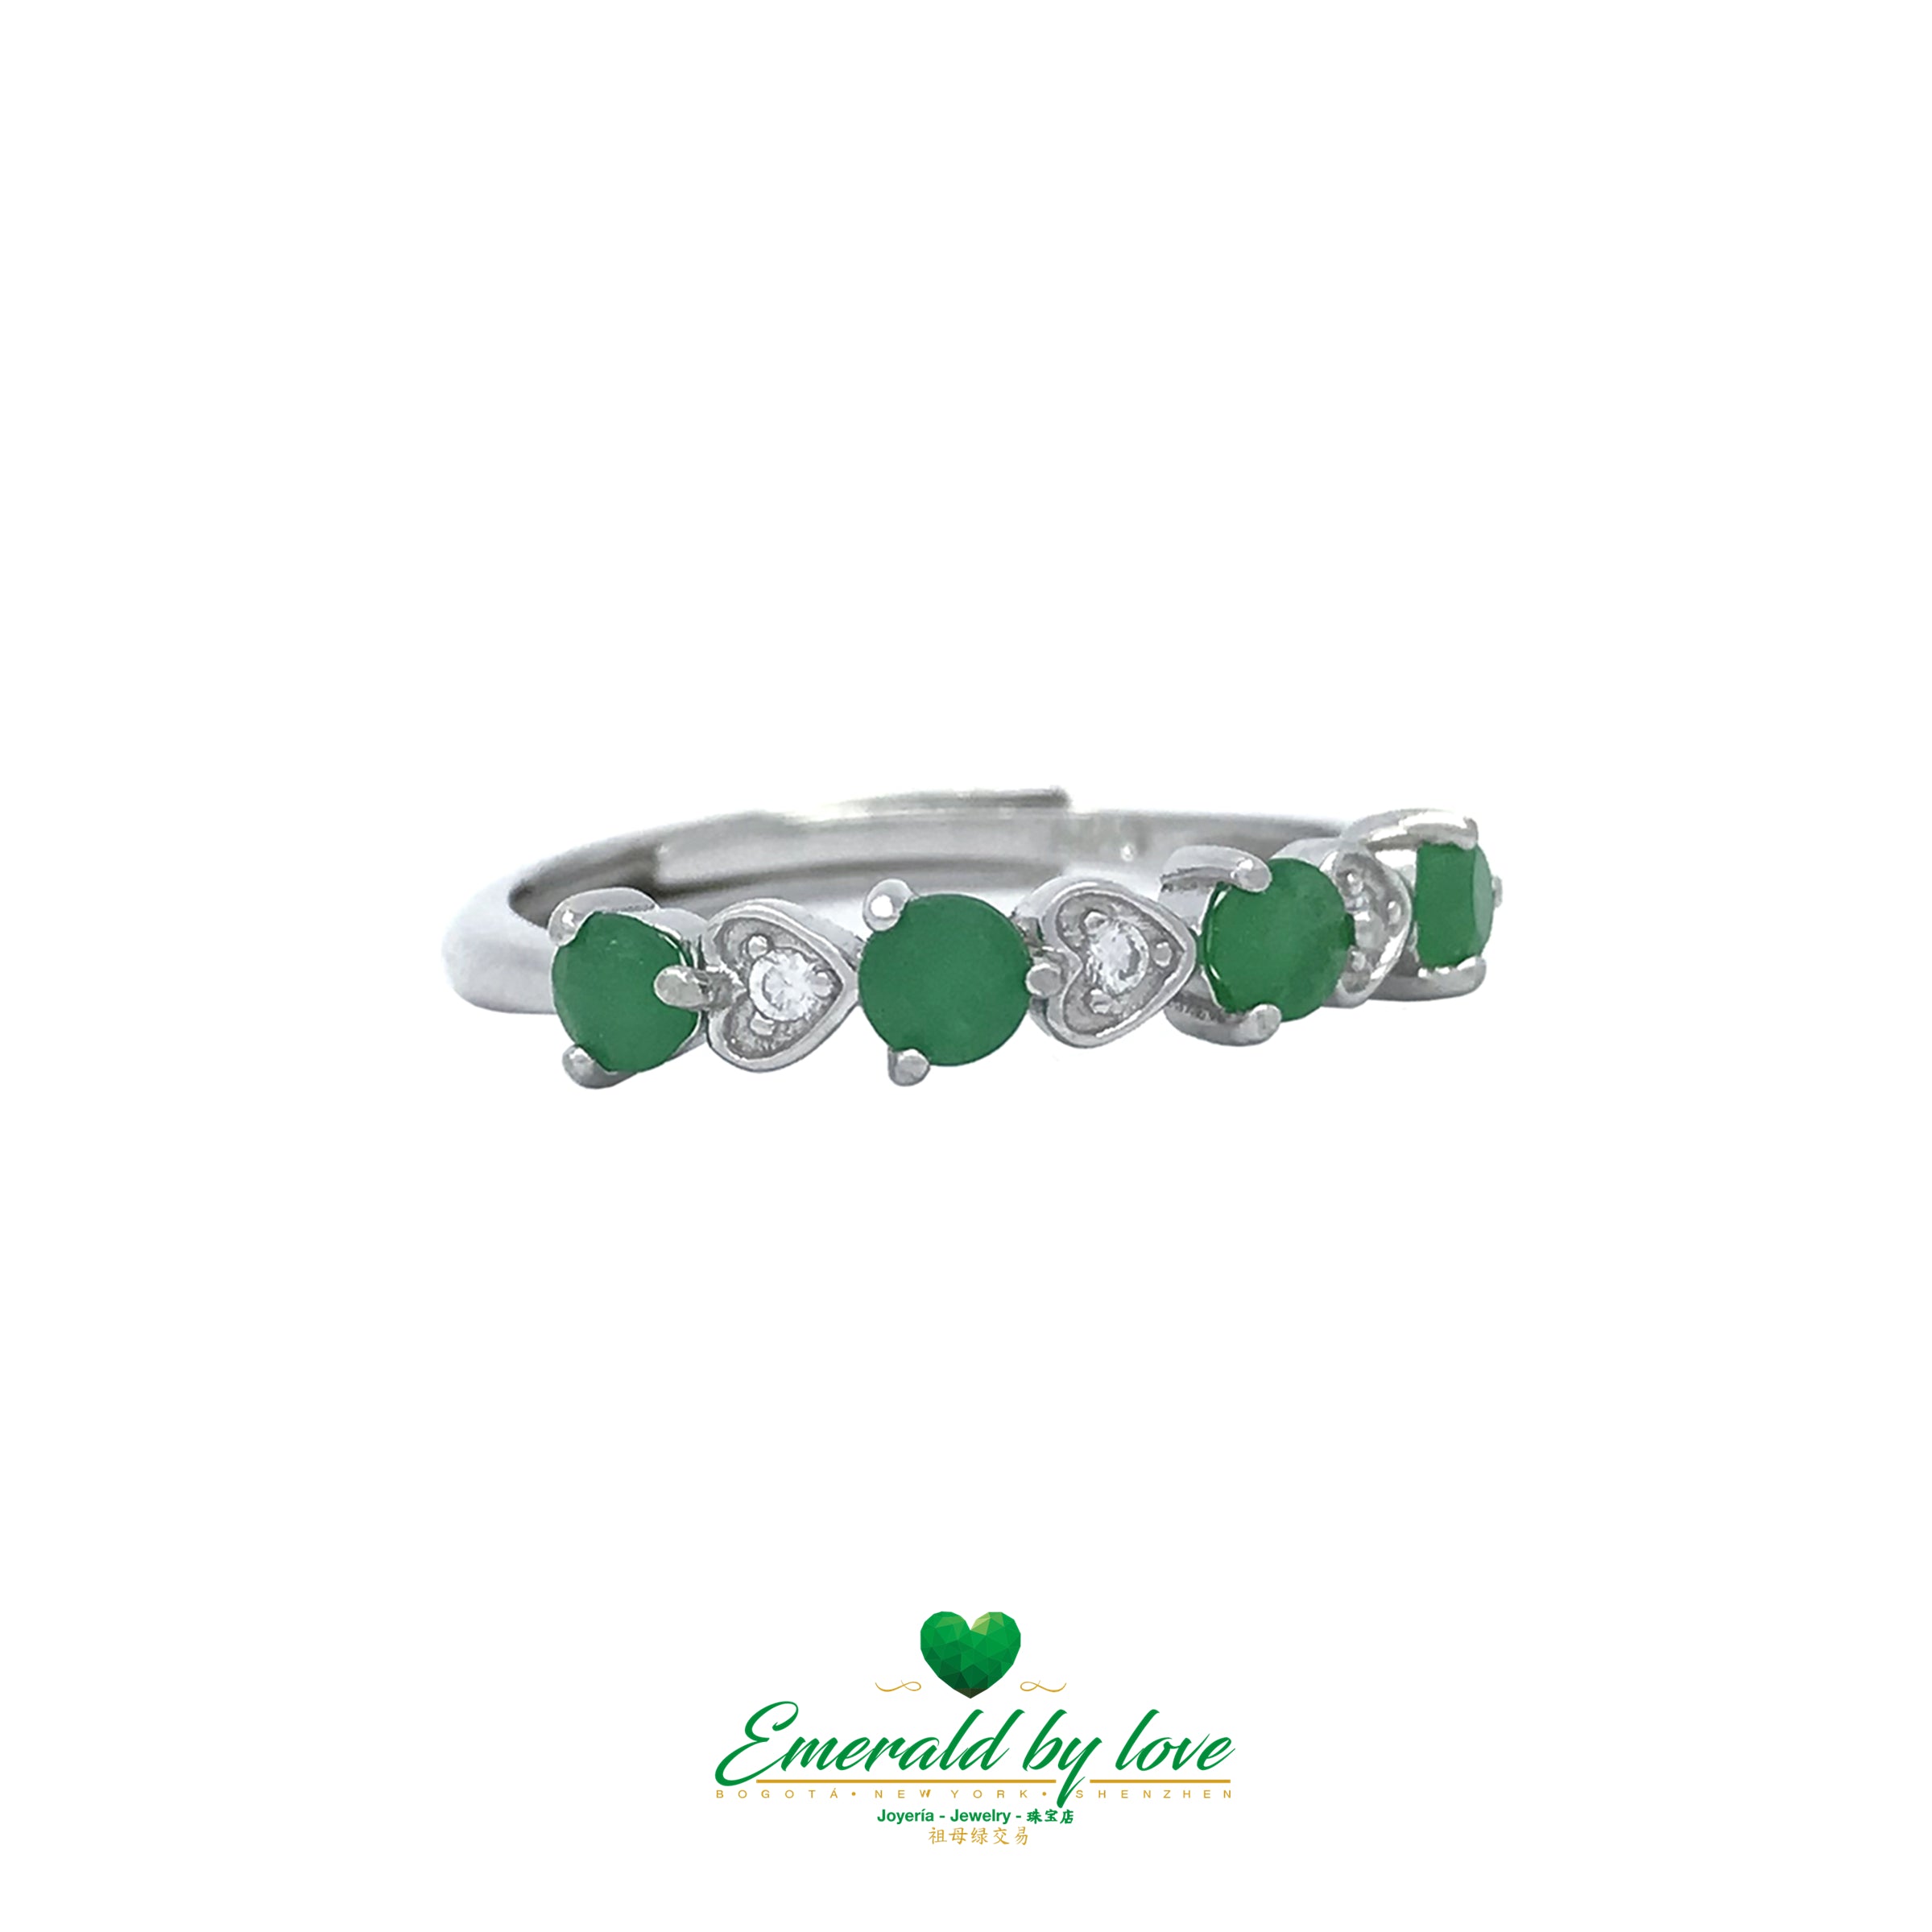 Interlocked Band Ring with Round Emeralds and Zirconia Hearts